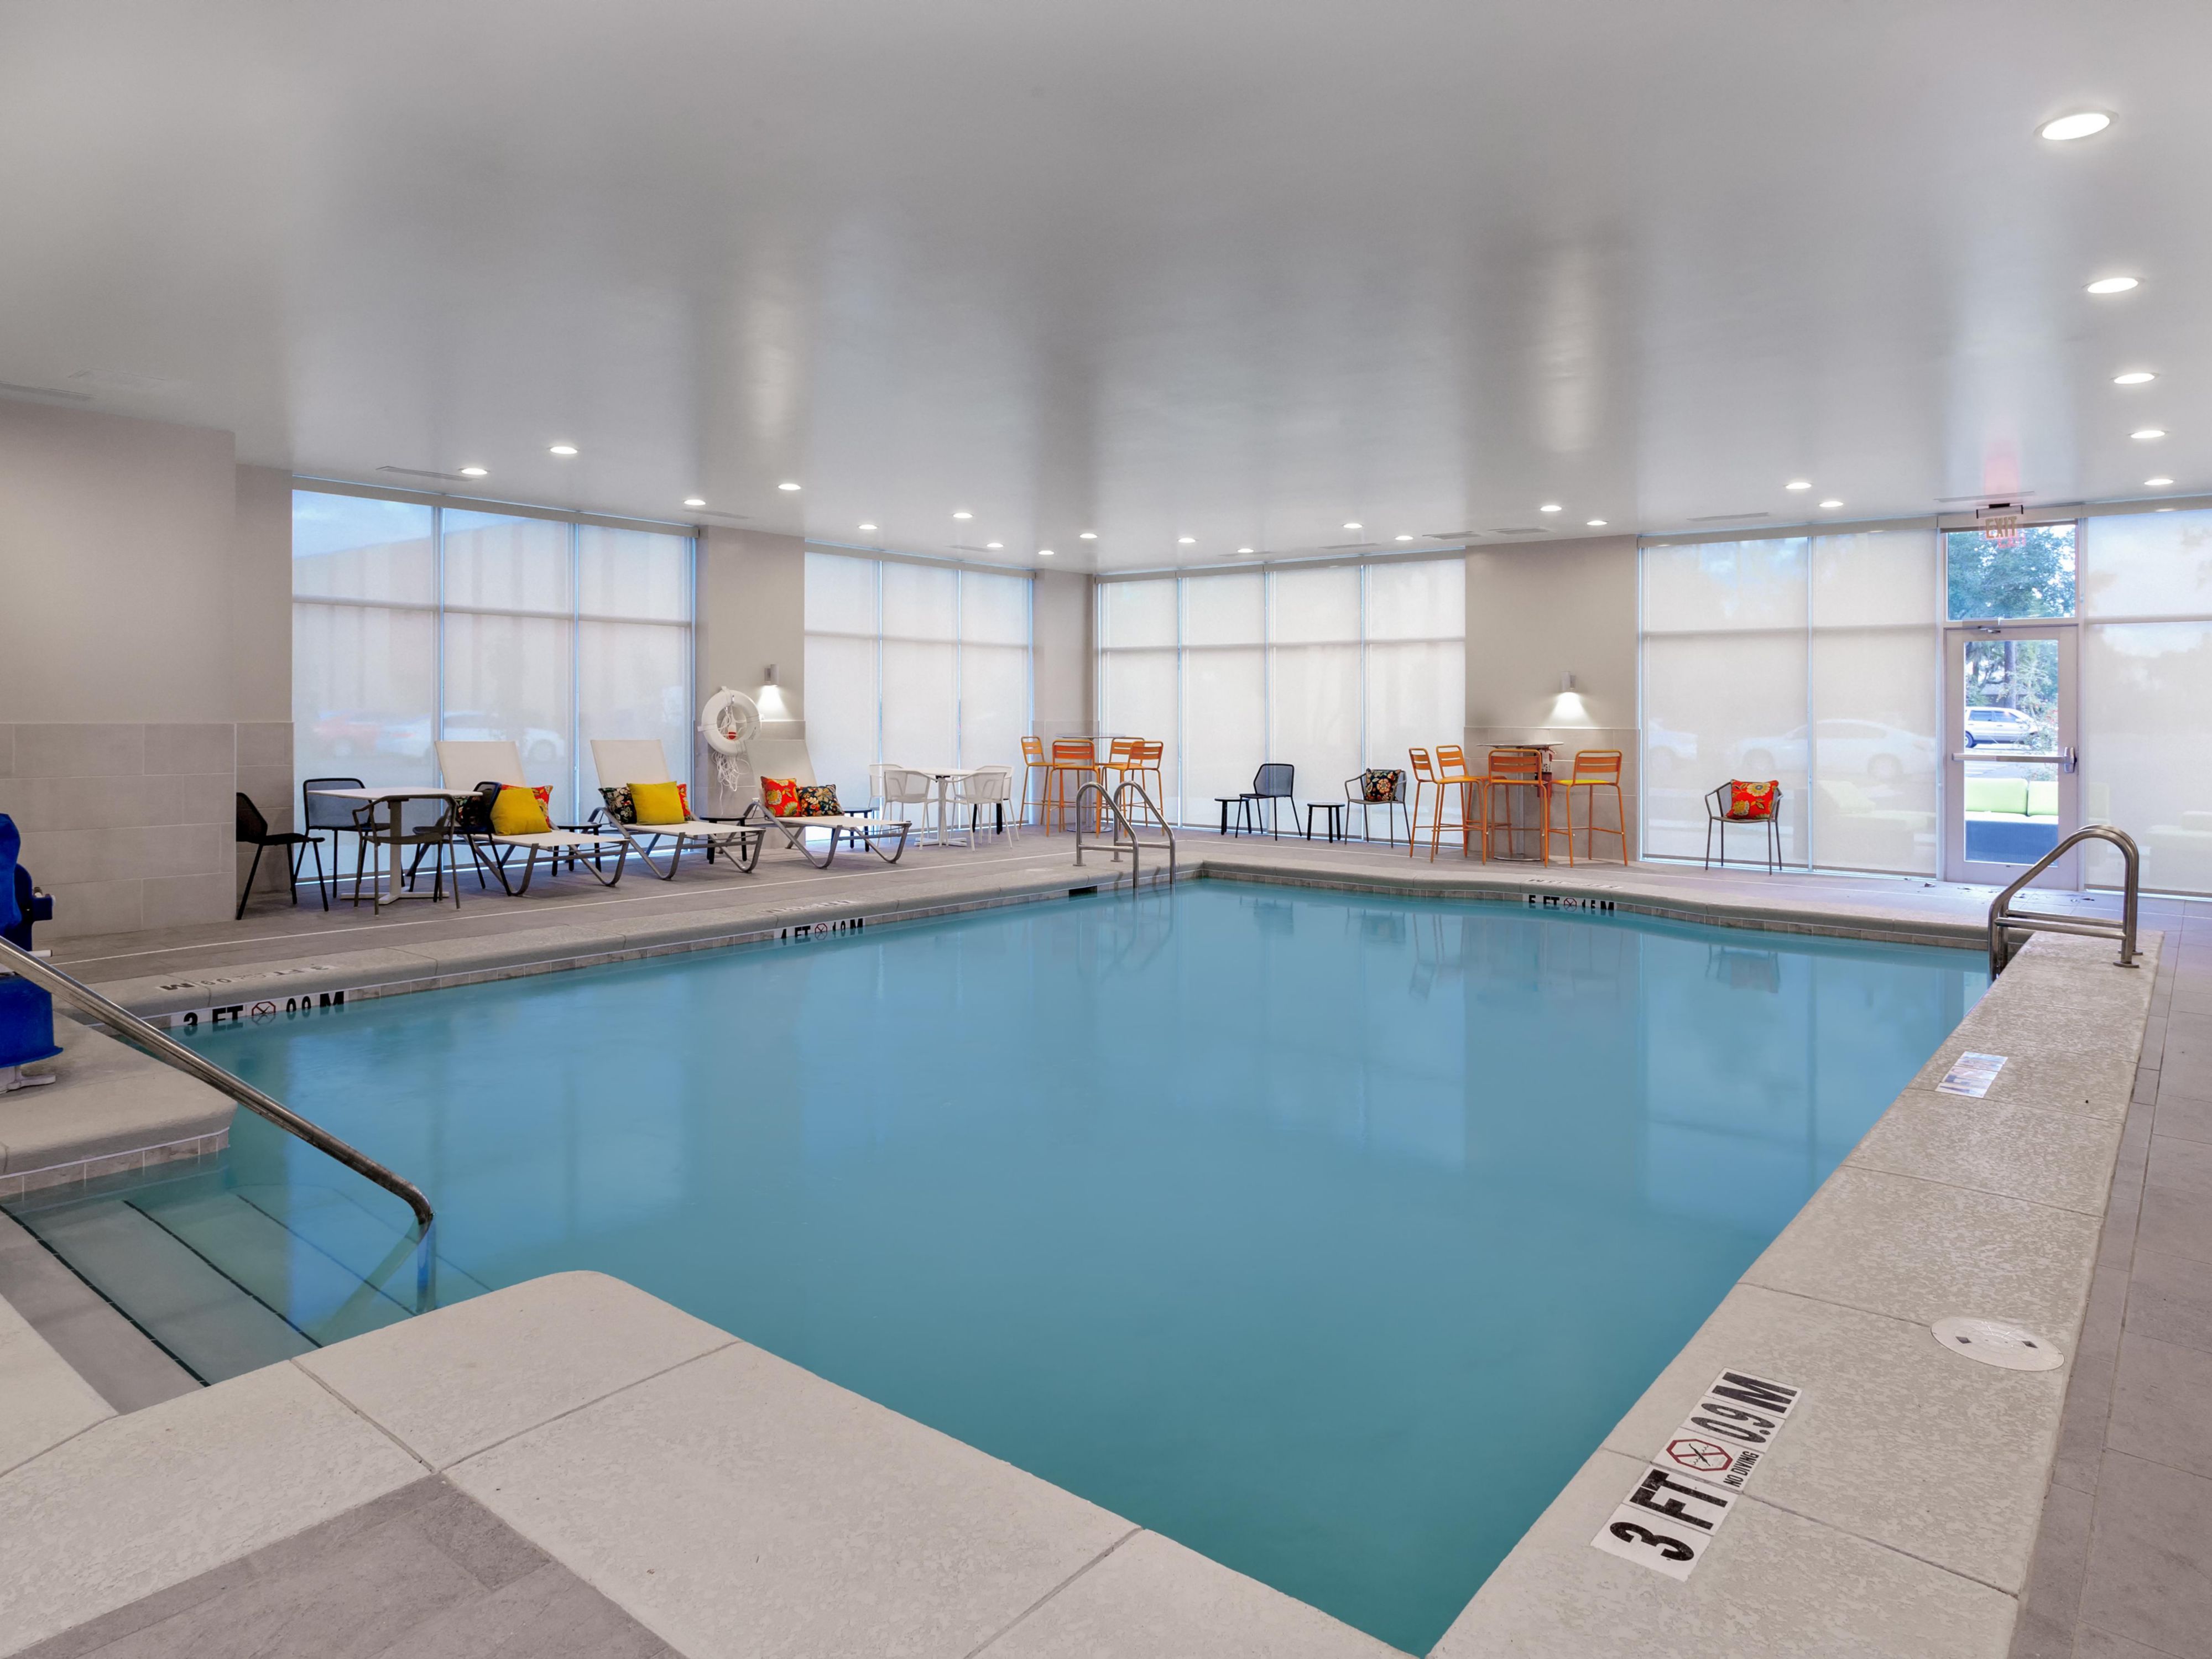 This newly constructed hotel completed in 2019 has an indoor, salt filtered pool, outdoor Cabanas for dining and relaxing, and a modern fitness facility, with state-of-the-art equipment including cardio, treadmills, free weights, and rowing machines. We also have a sundeck, plenty of free parking and all indoor corridor rooms.